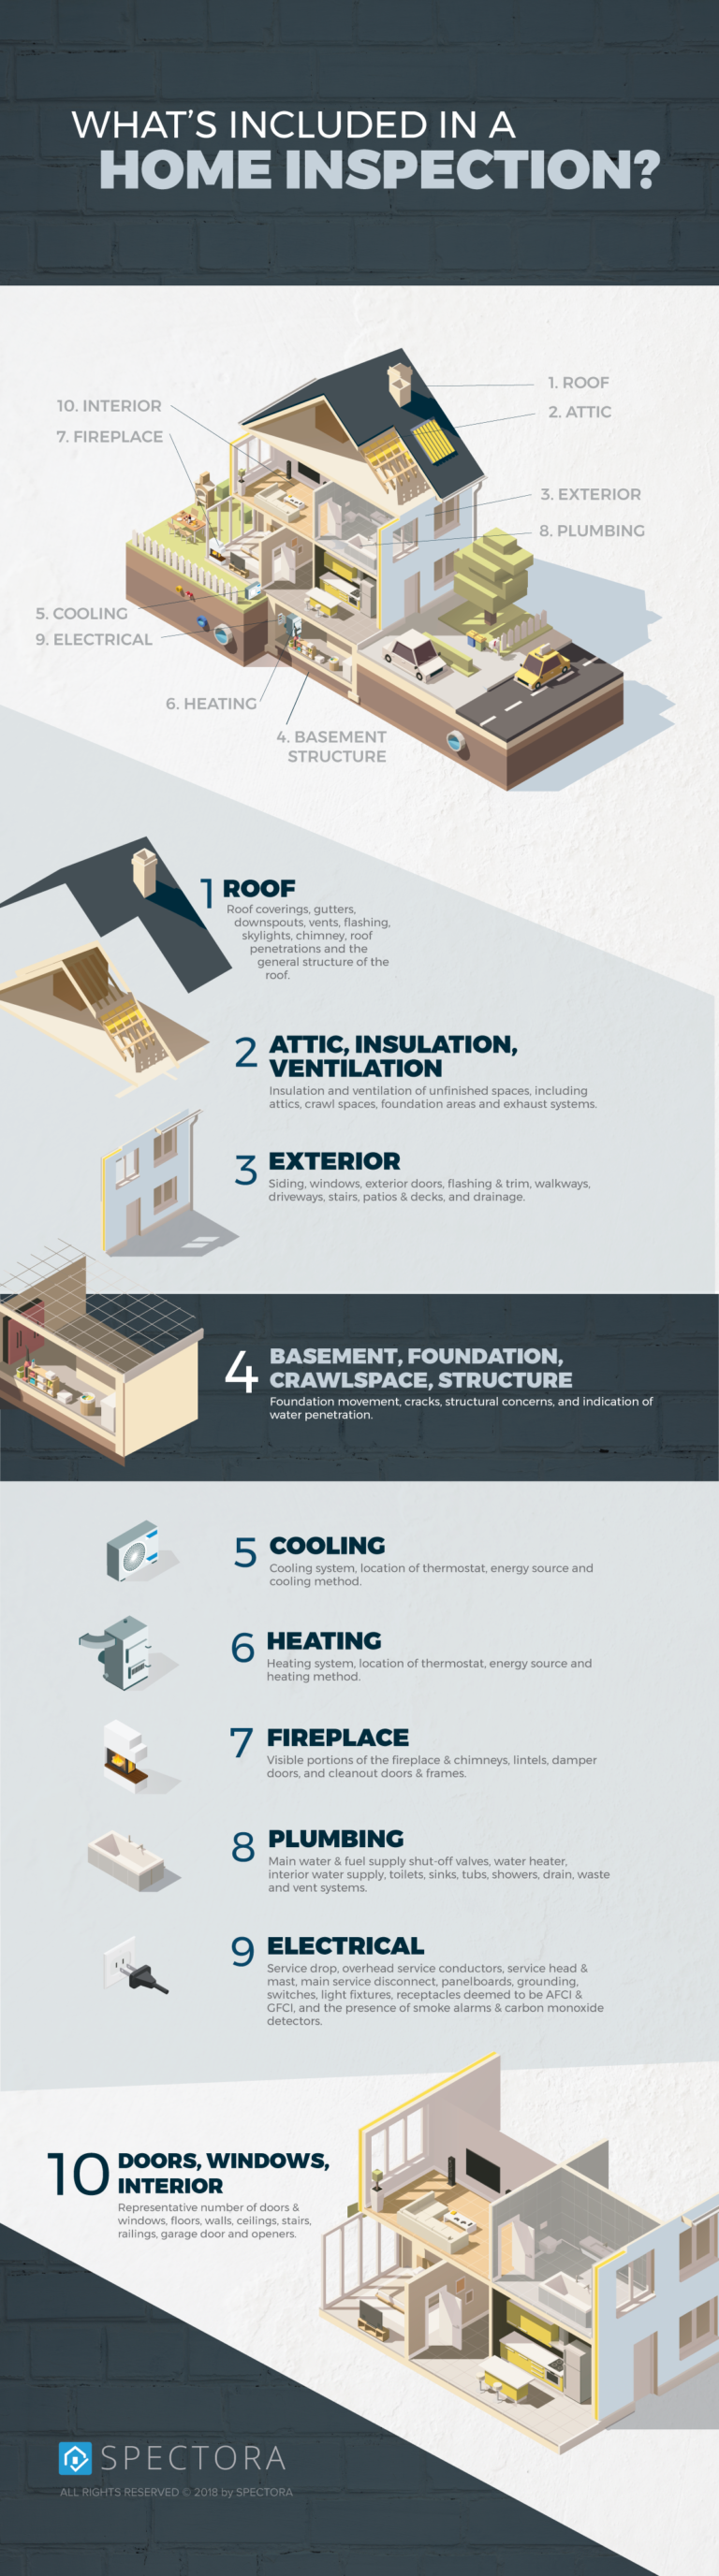 What is included in a home inspection?